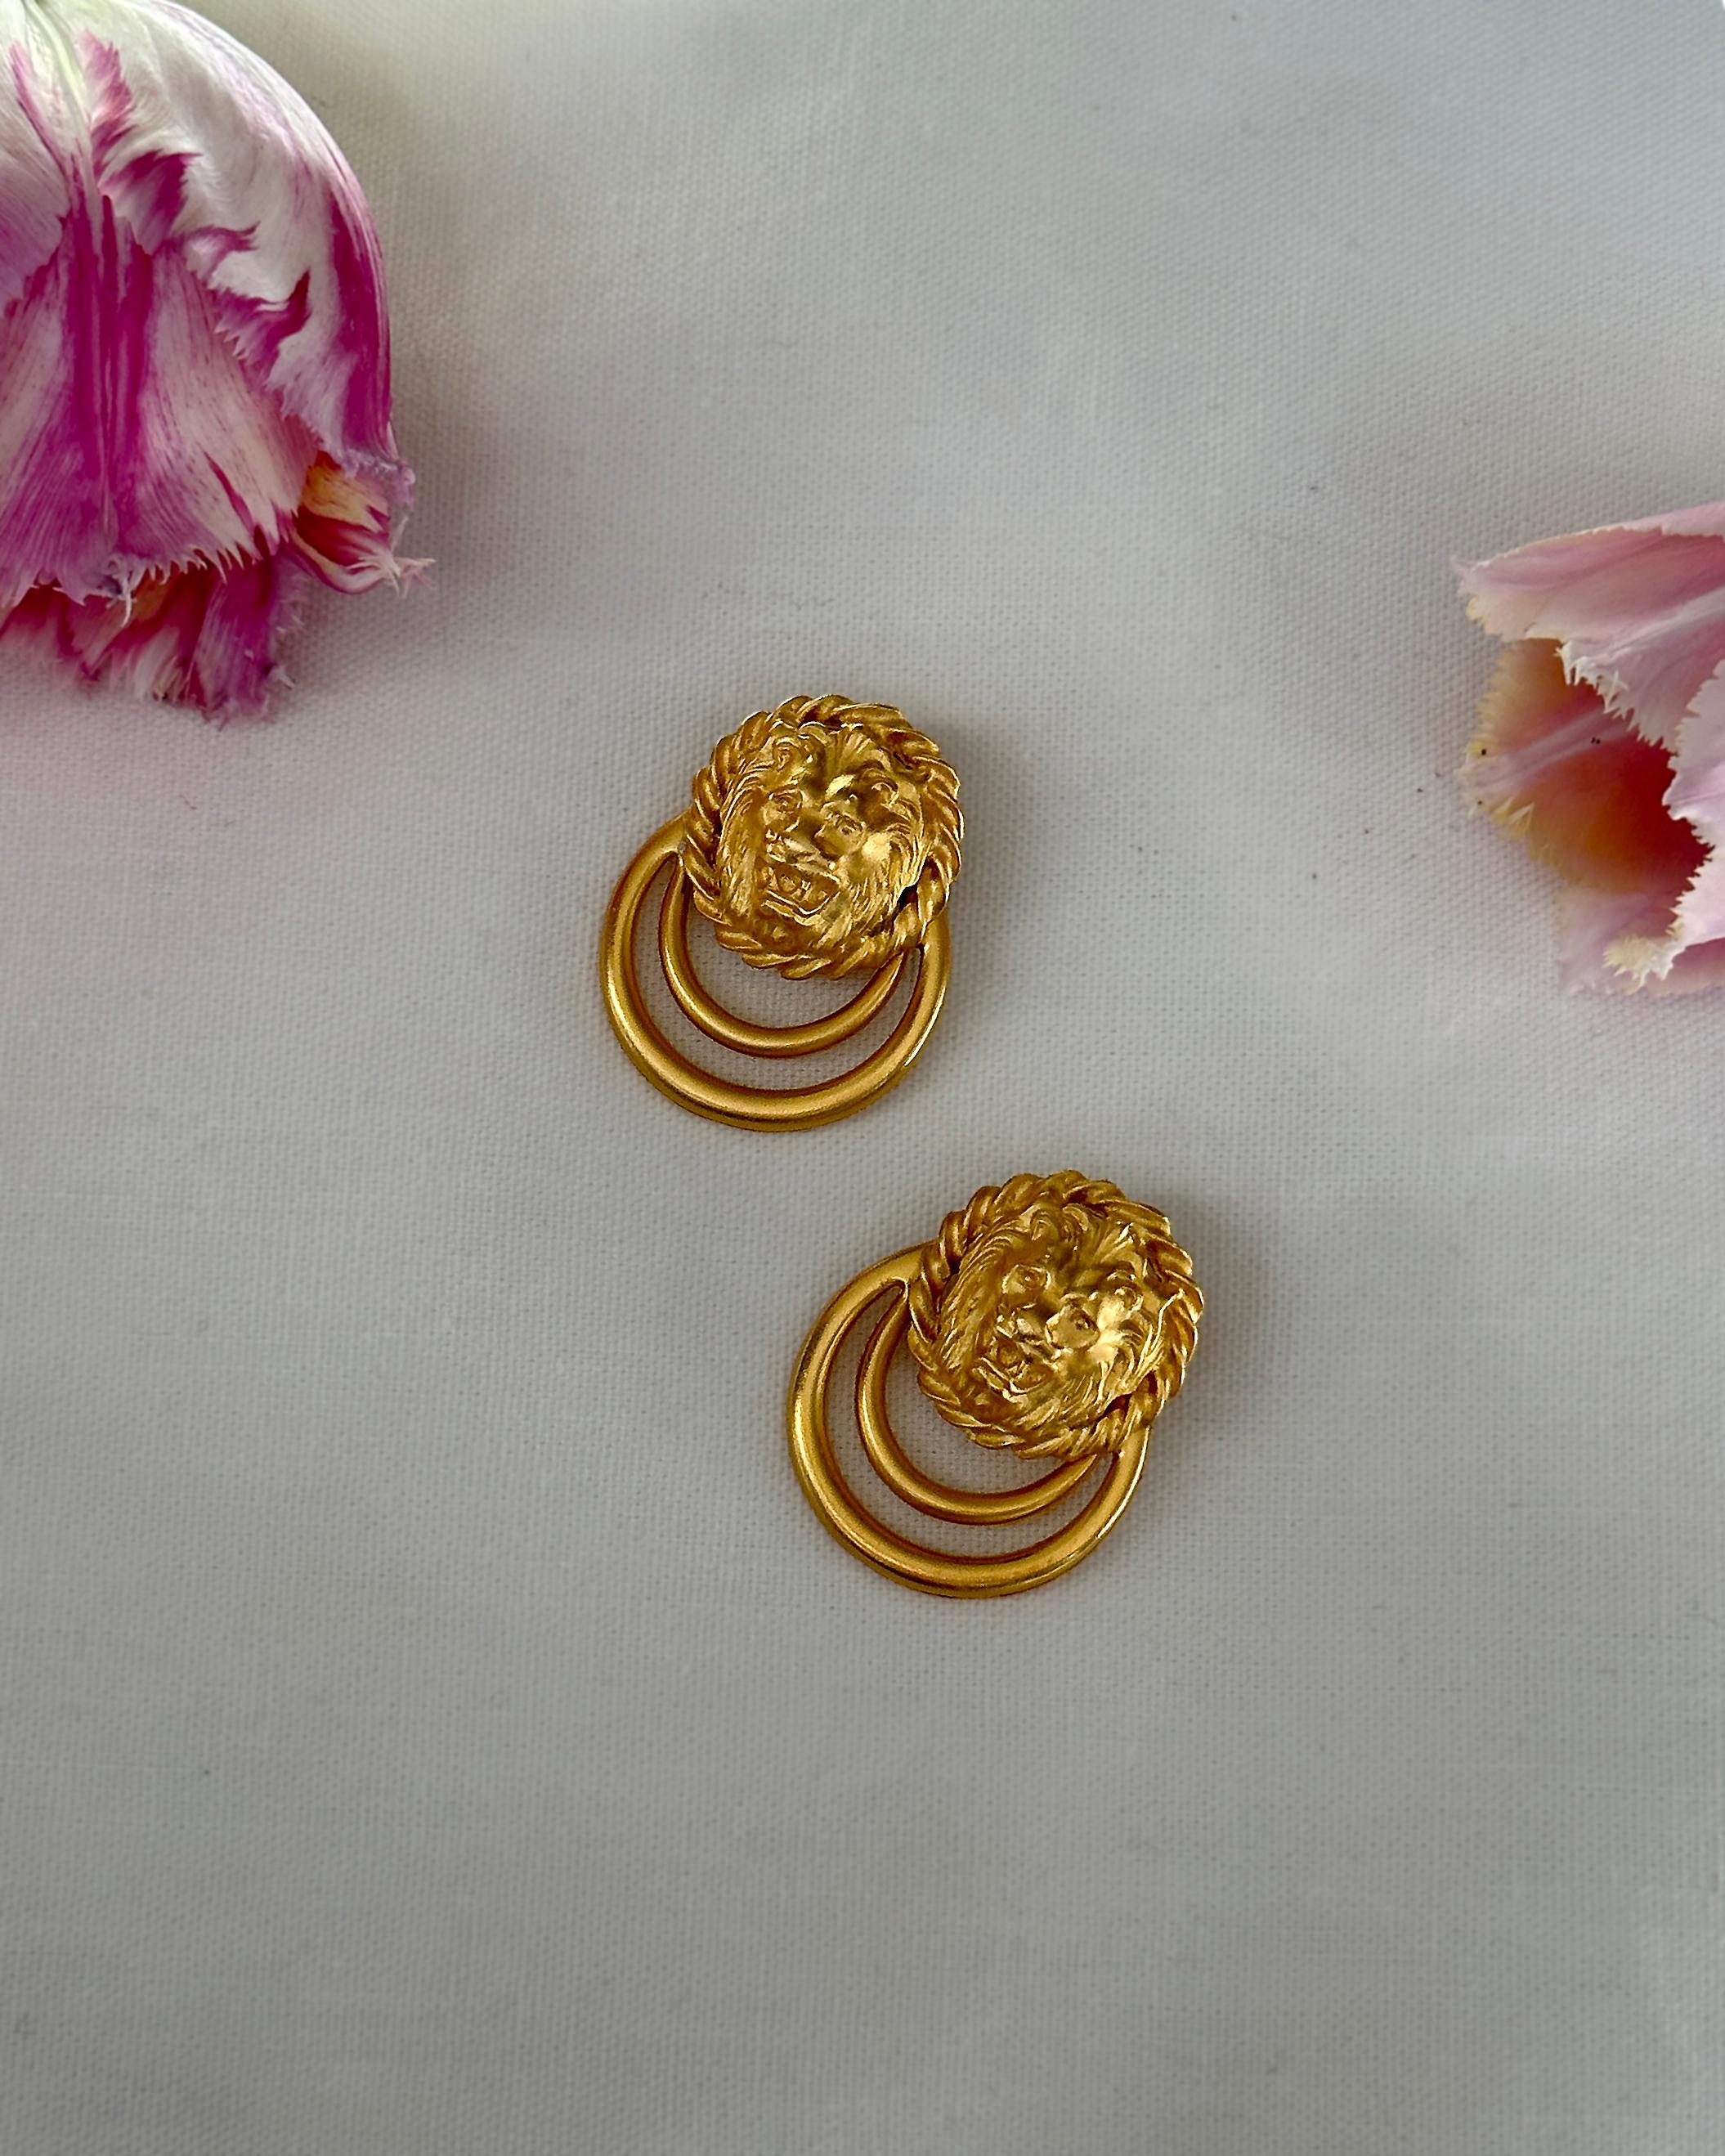 These vintage gold lion doorknocker earrings are giving vintage Versace vibes! They feature a sculptural lion head in rich matte gold, with a swinging circular drop, creating a bit of movement. They are finished with a post back for pierced ears,